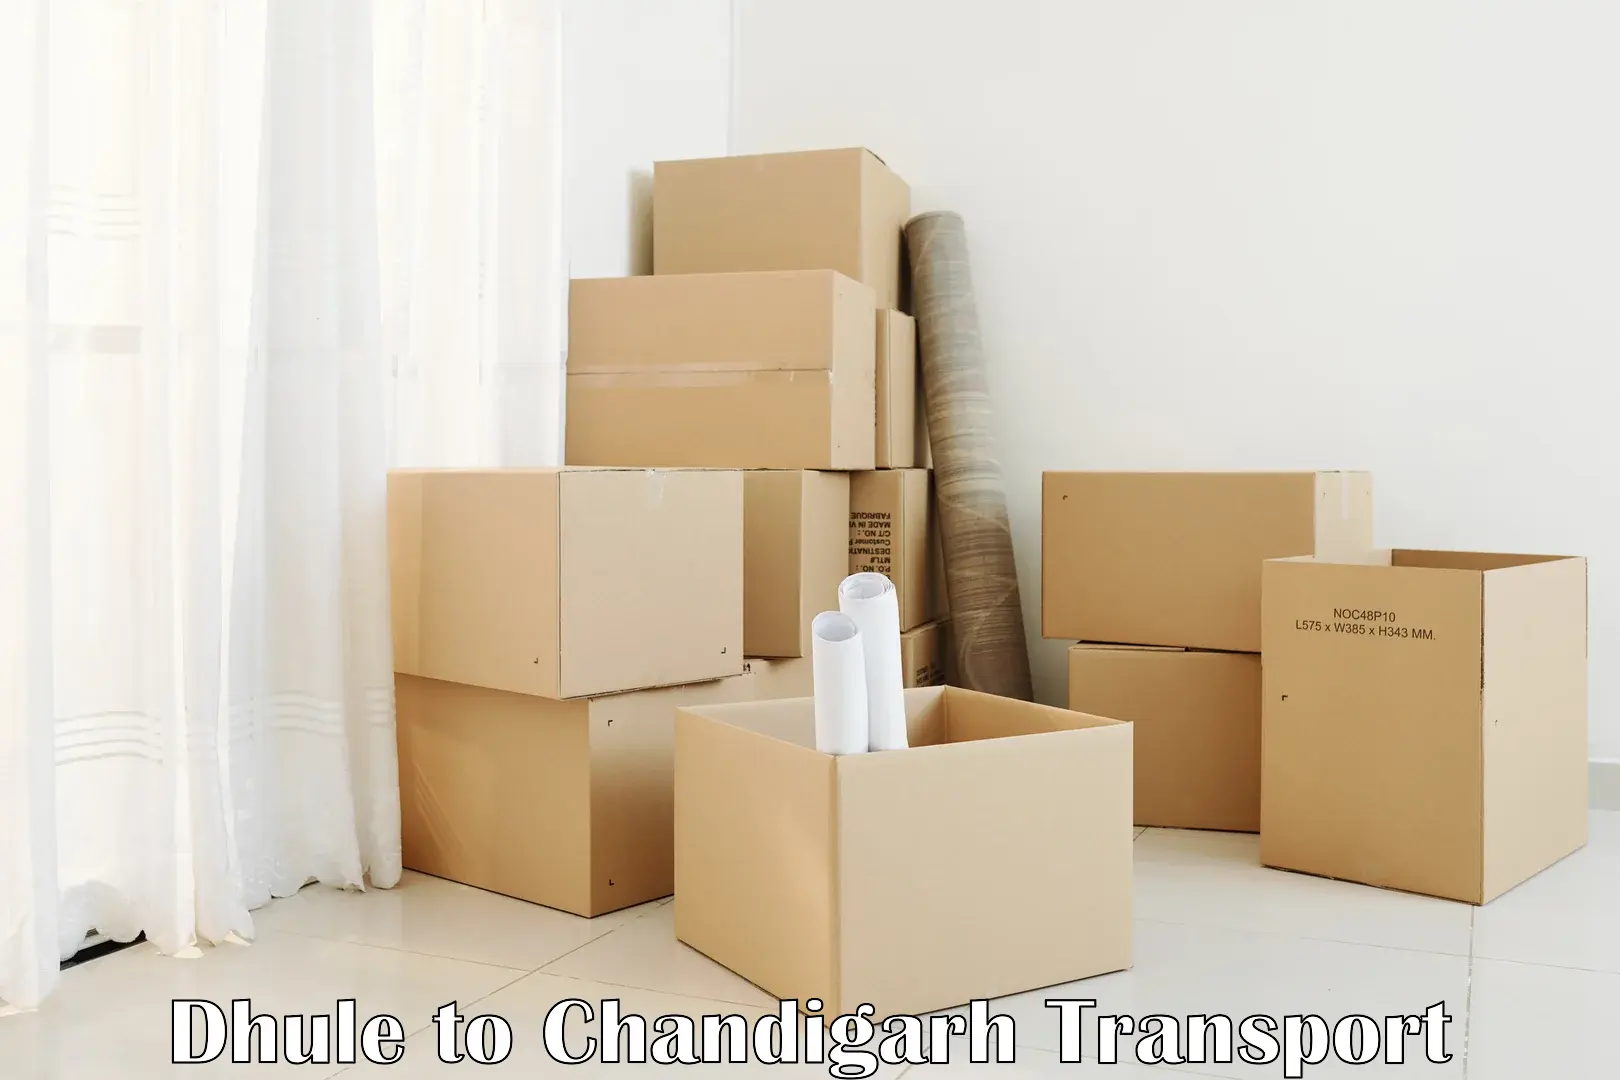 Pick up transport service Dhule to Chandigarh